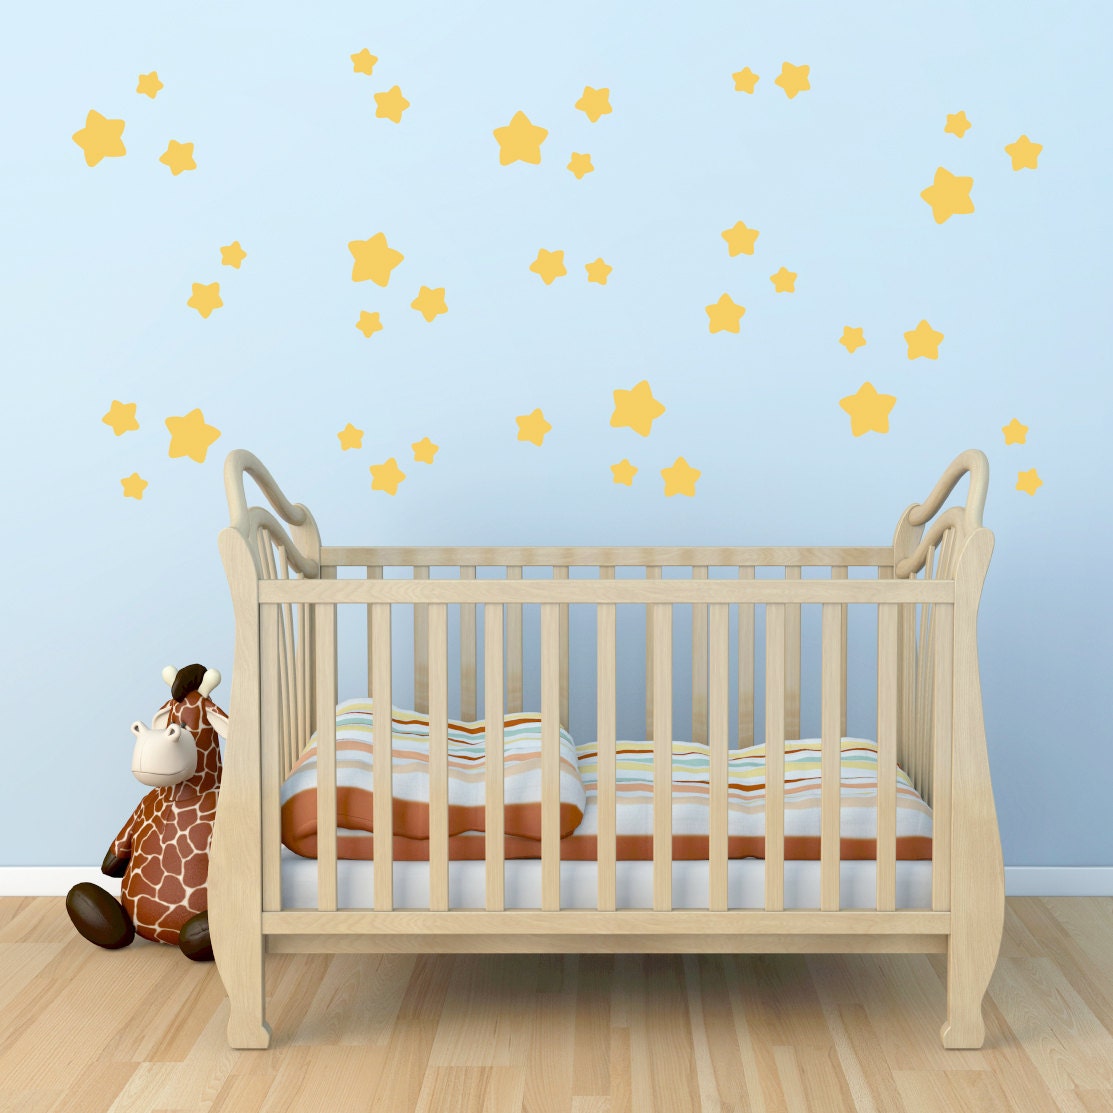 Twinkle Star Wall Decal - Set of 38 Stars - Star Wall Stickers - Children Wall Decals